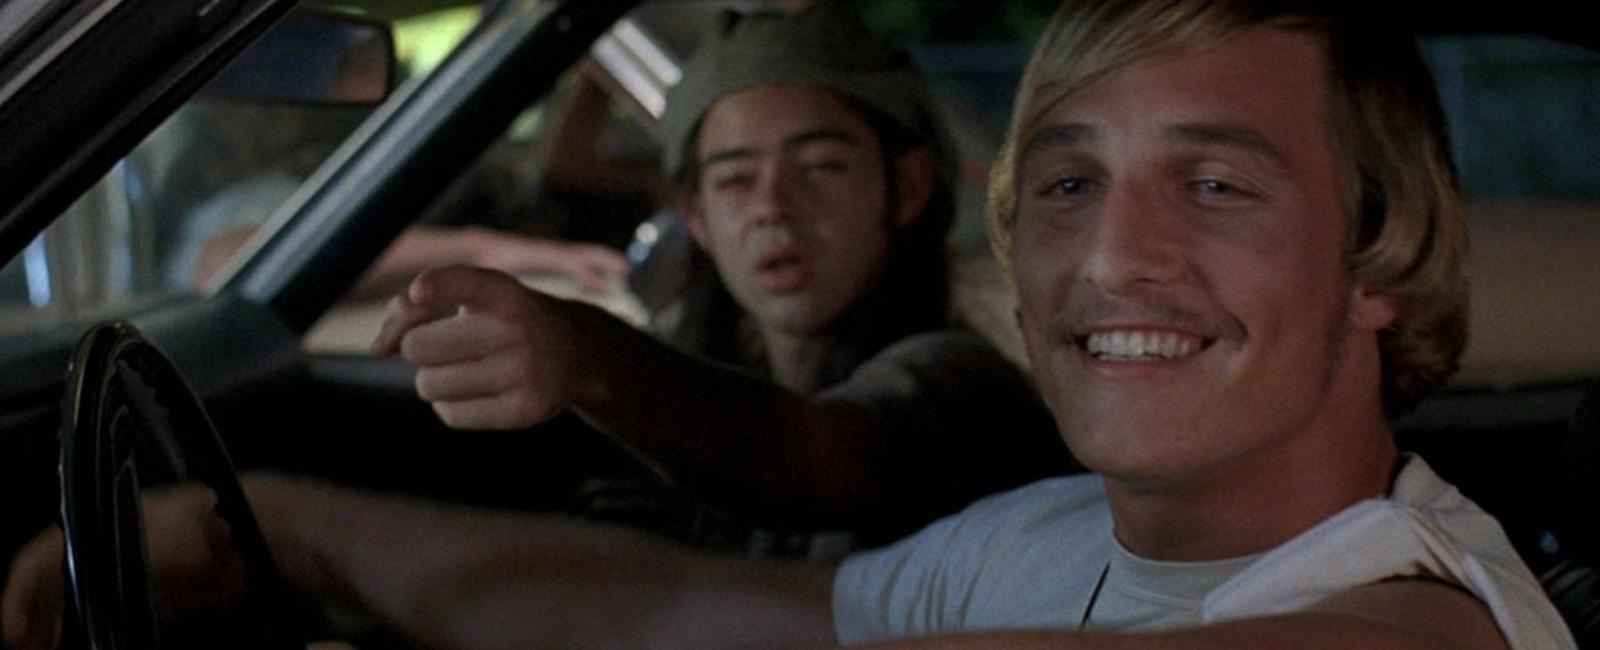 The first movie scene matthew mcconaughey ever filmed was in dazed and confused when he improvised his now famous line alright alright alright